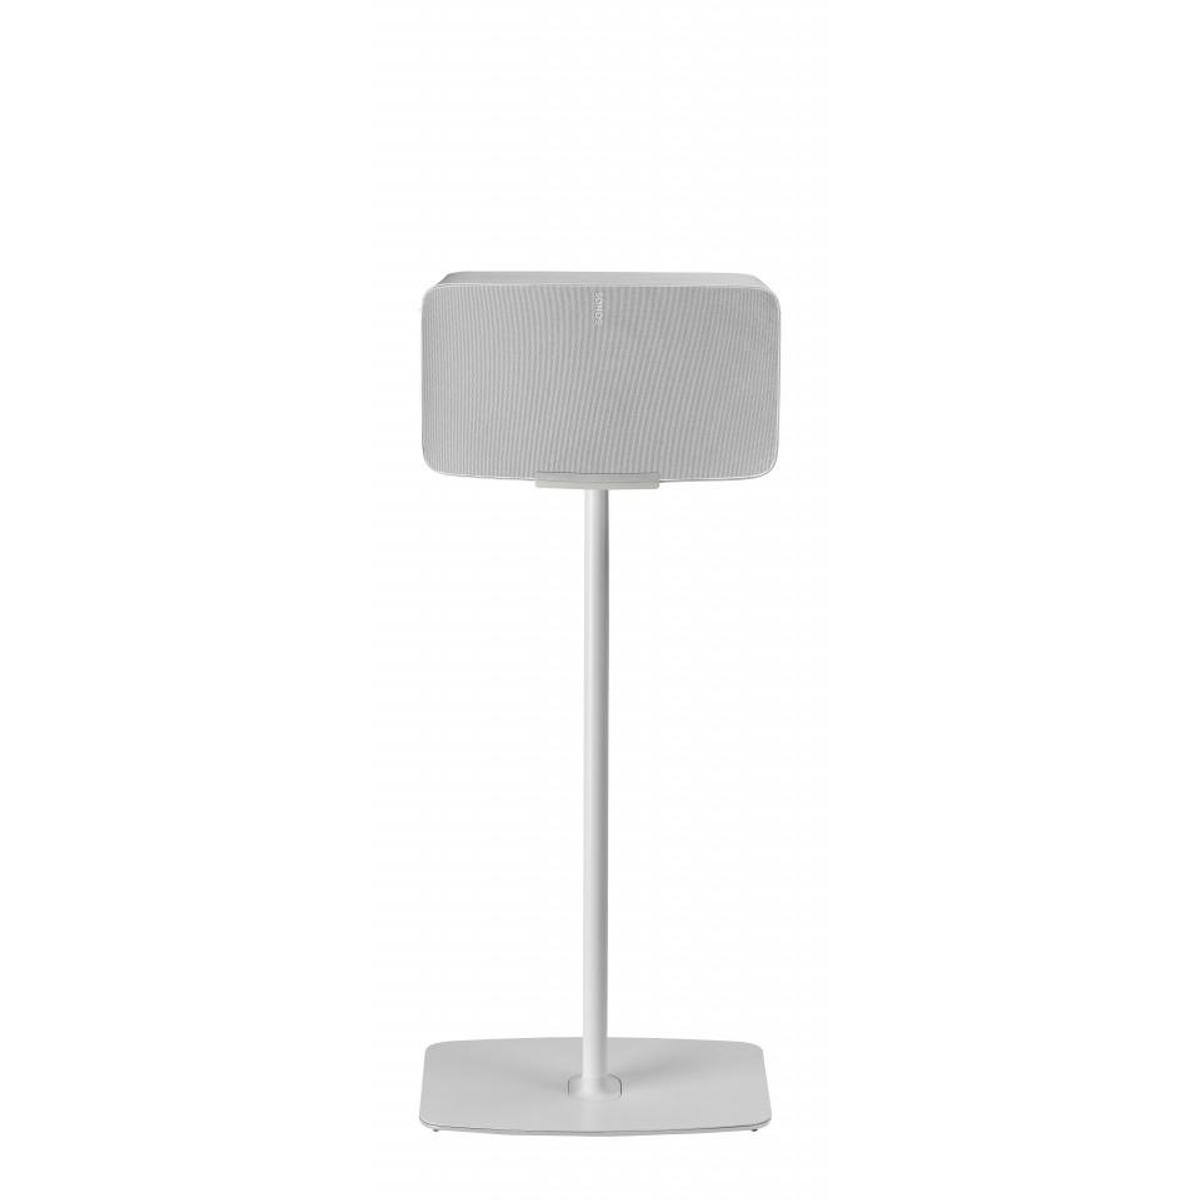 Floor Stand Five/Play 5 - Wht x1